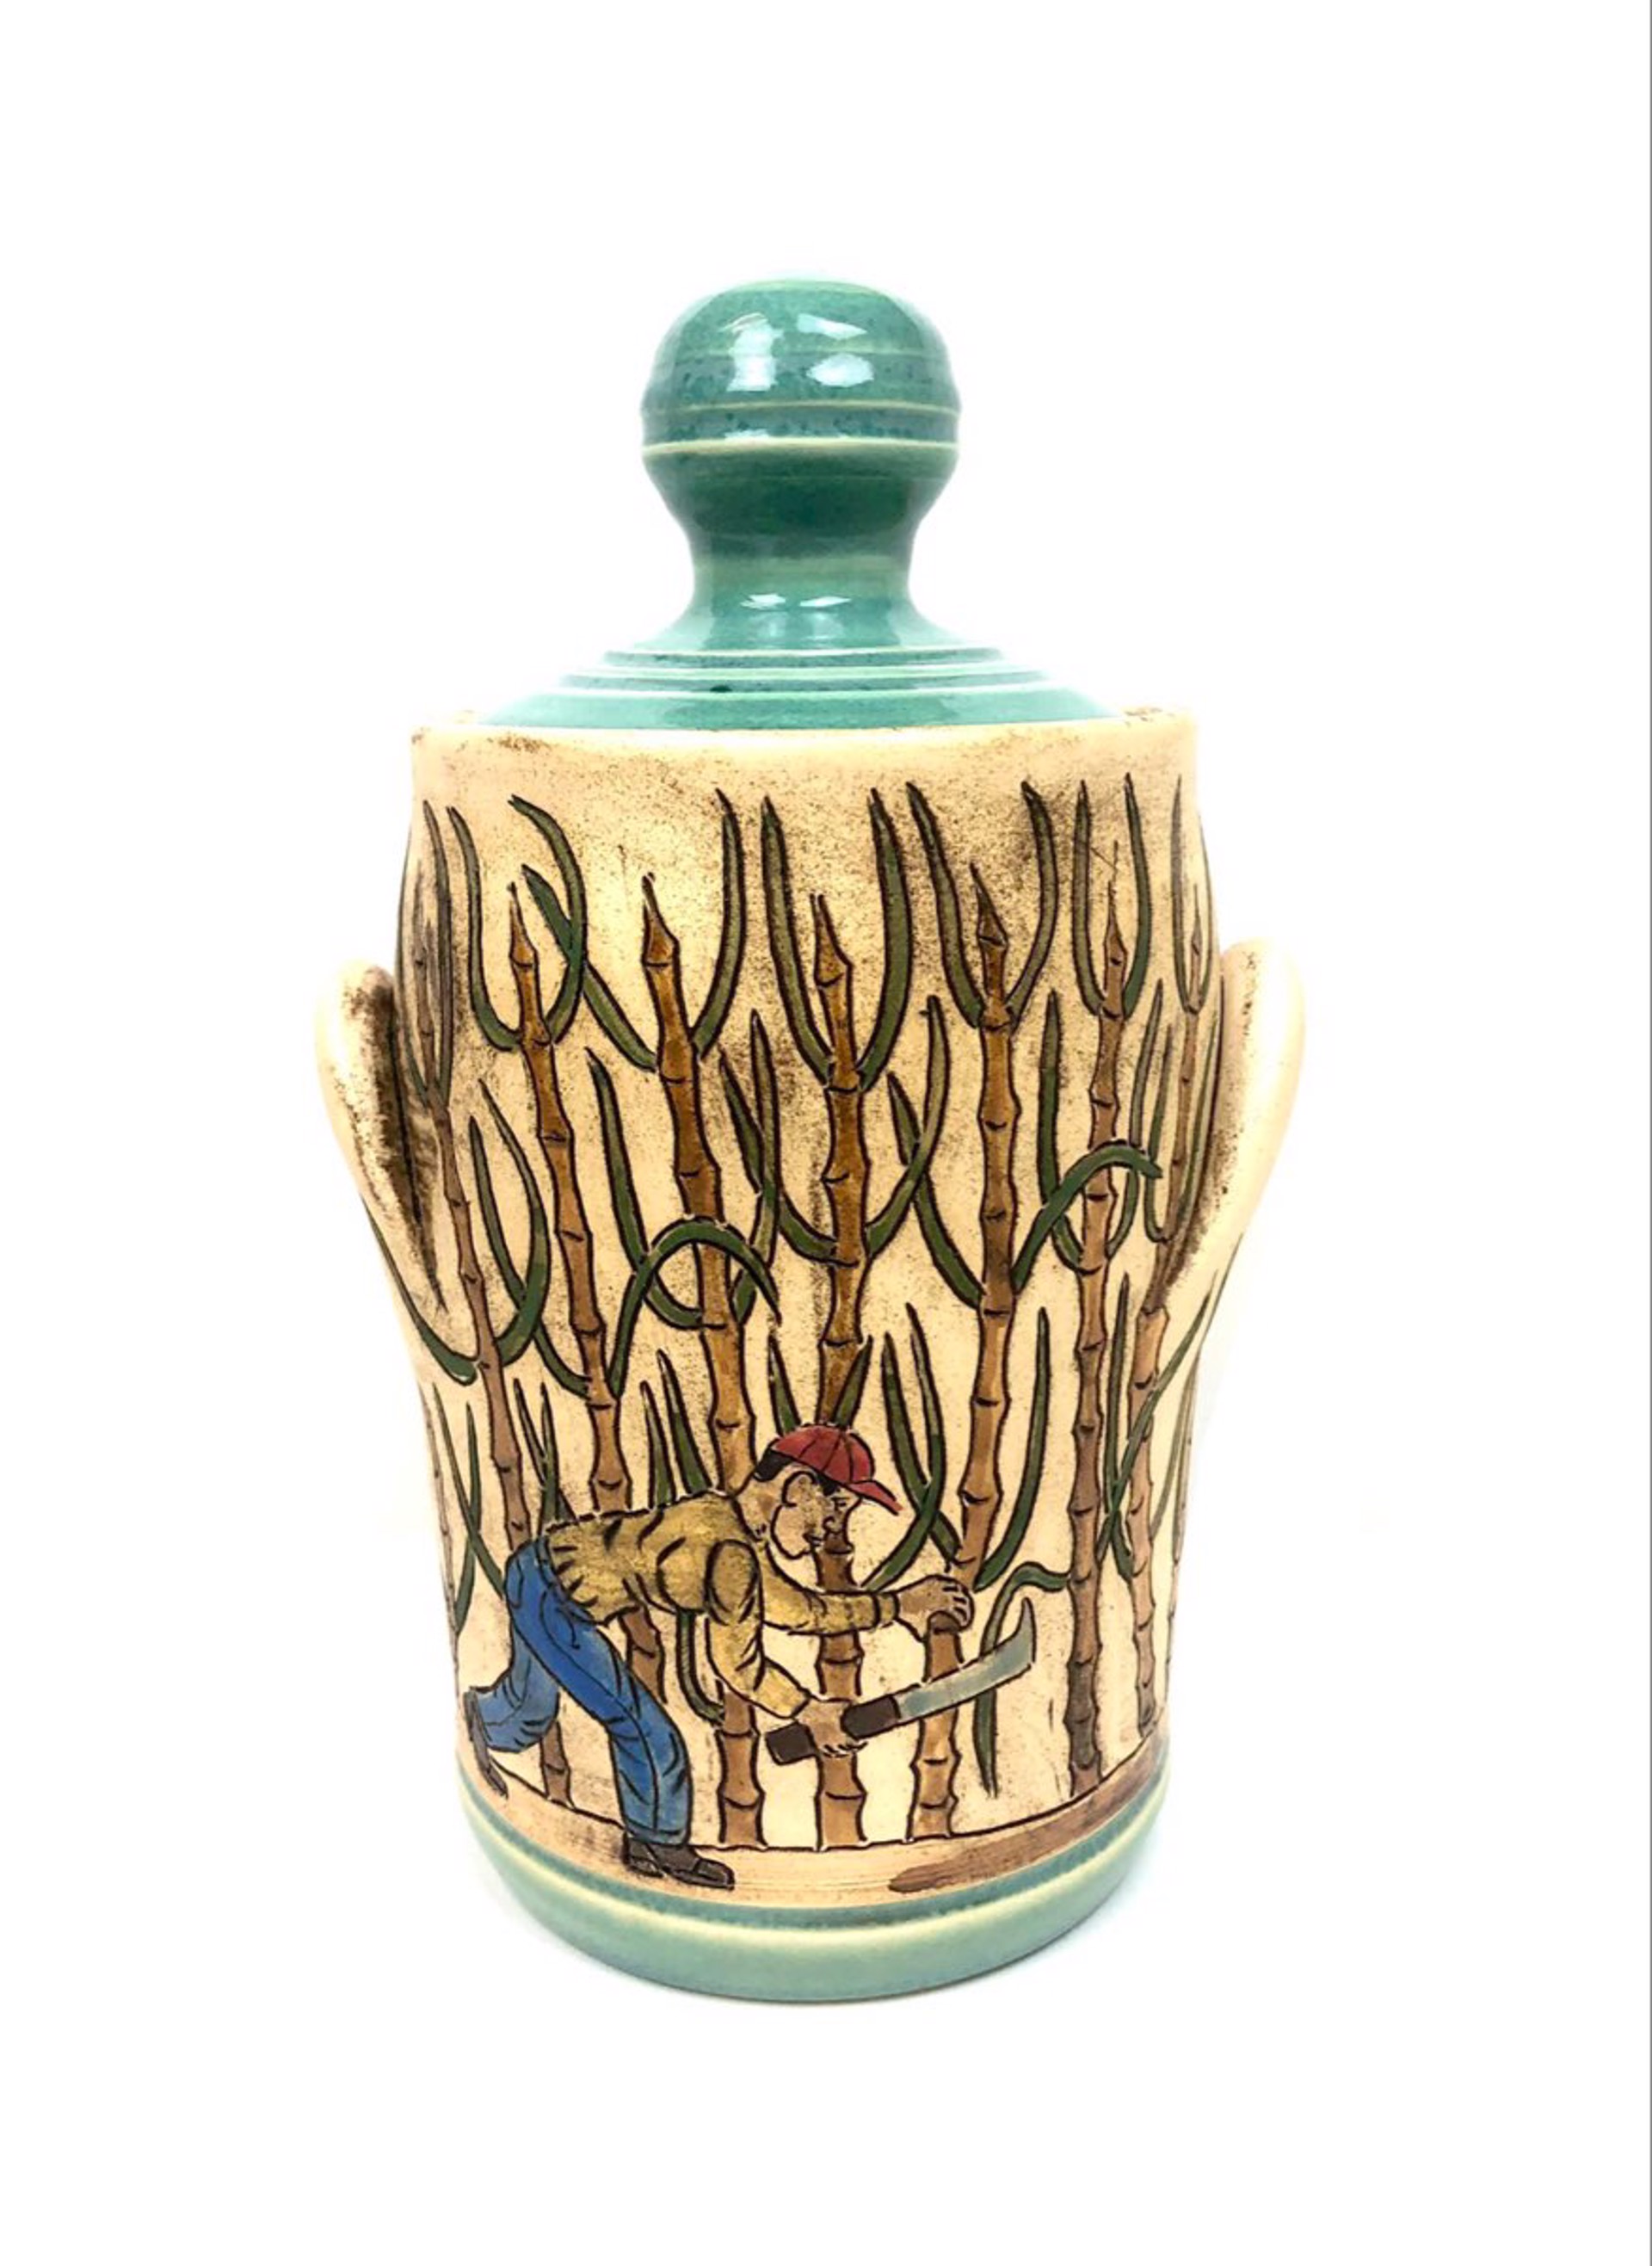 Sugar Cane Covered Jar by Winton & Rosa Eugene